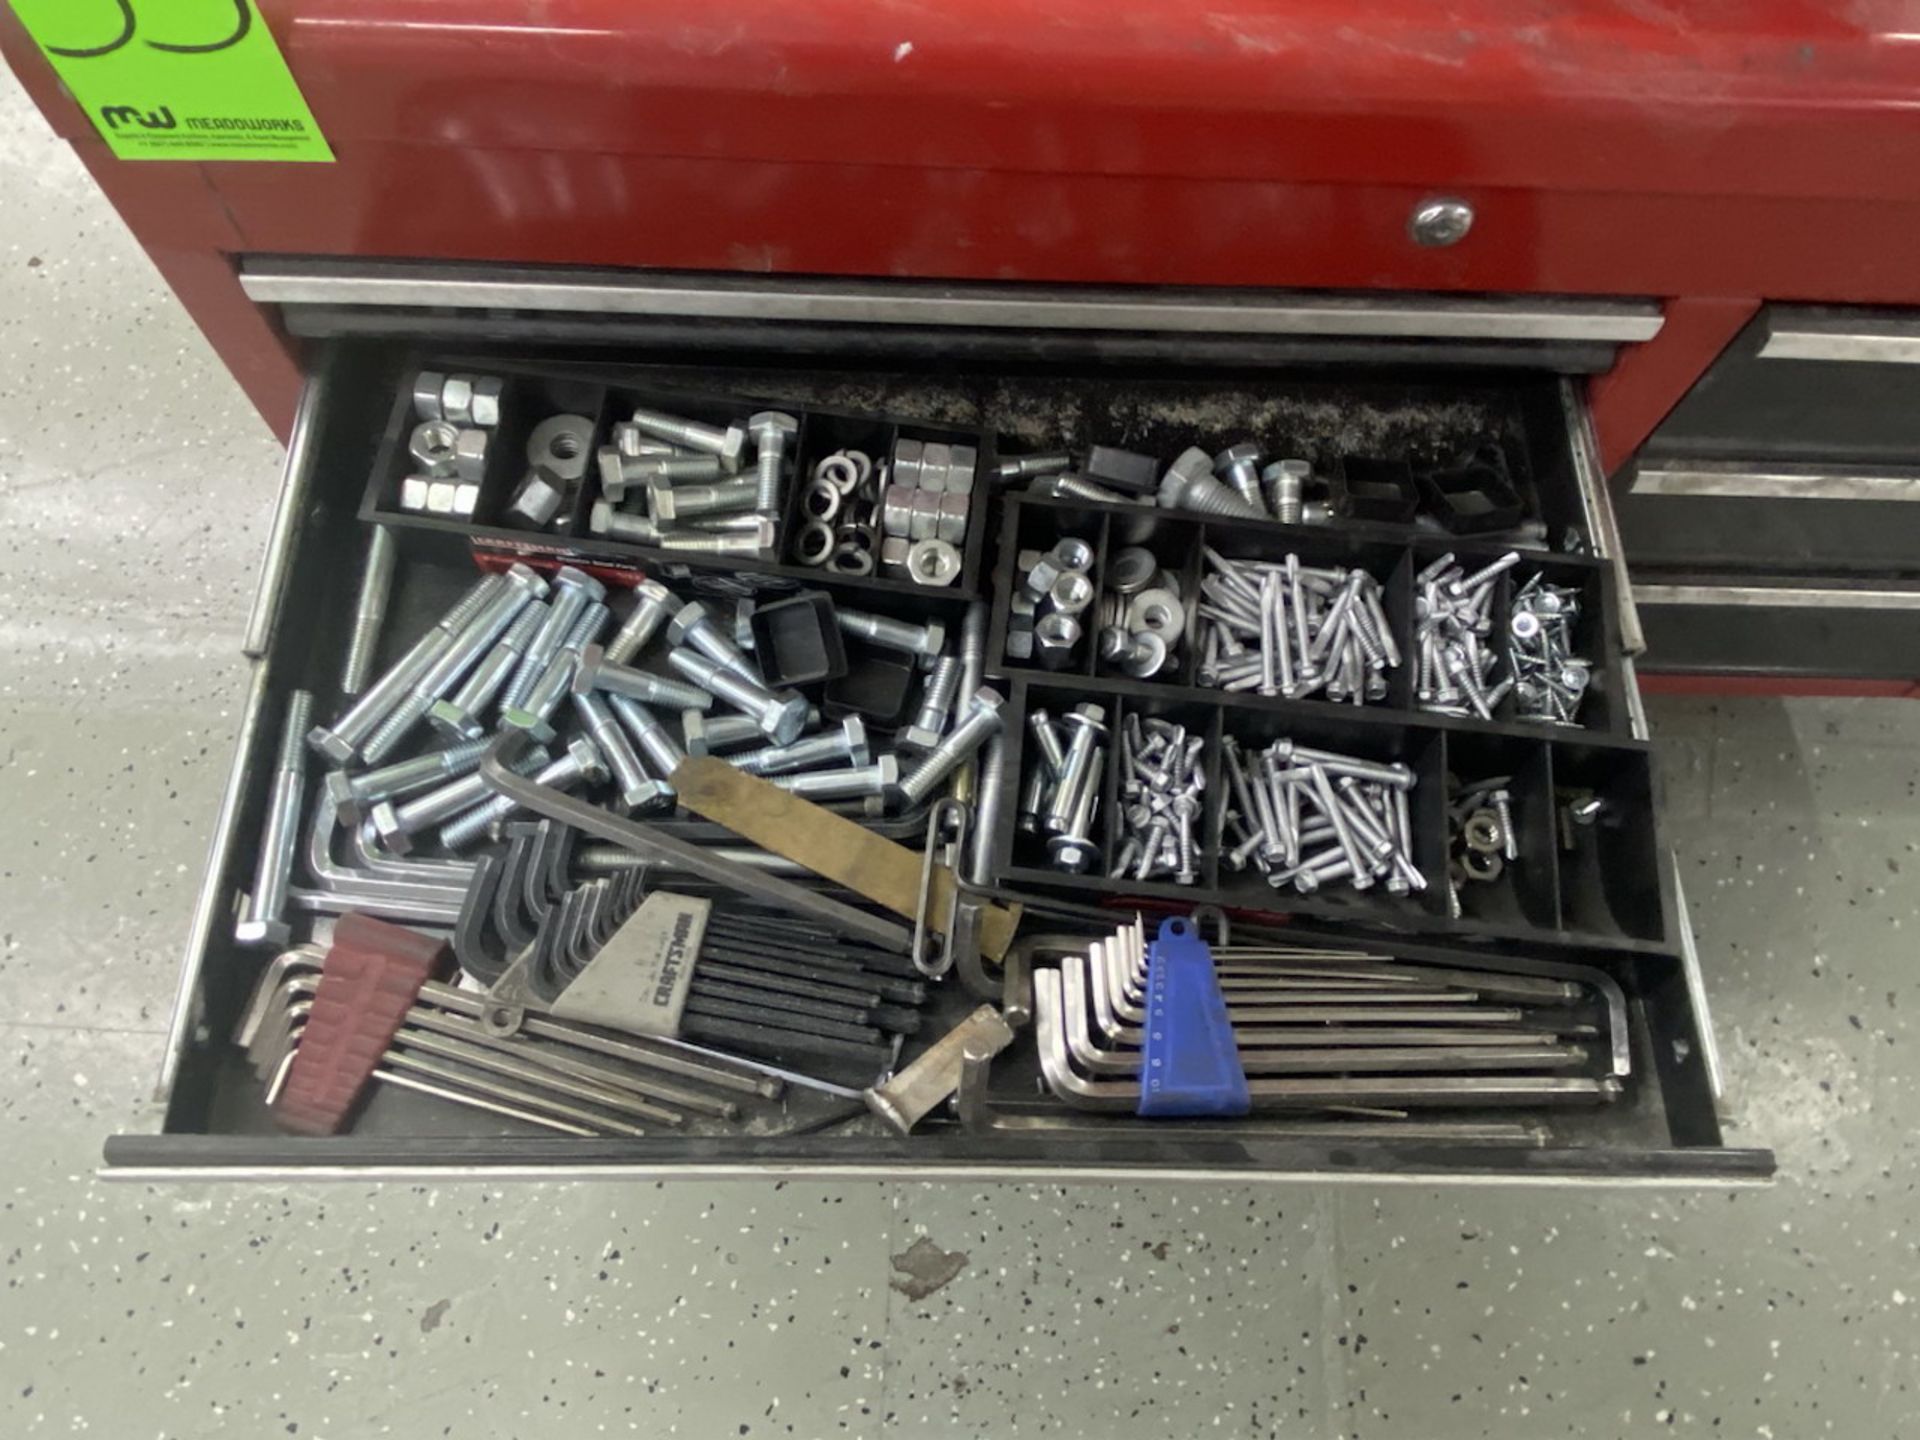 Craftsman 40" x 16" Tool Box & Contents Incl Screwdrivers, Hex Key Wrenches, Nuts, Screws & Bolts - Image 4 of 8